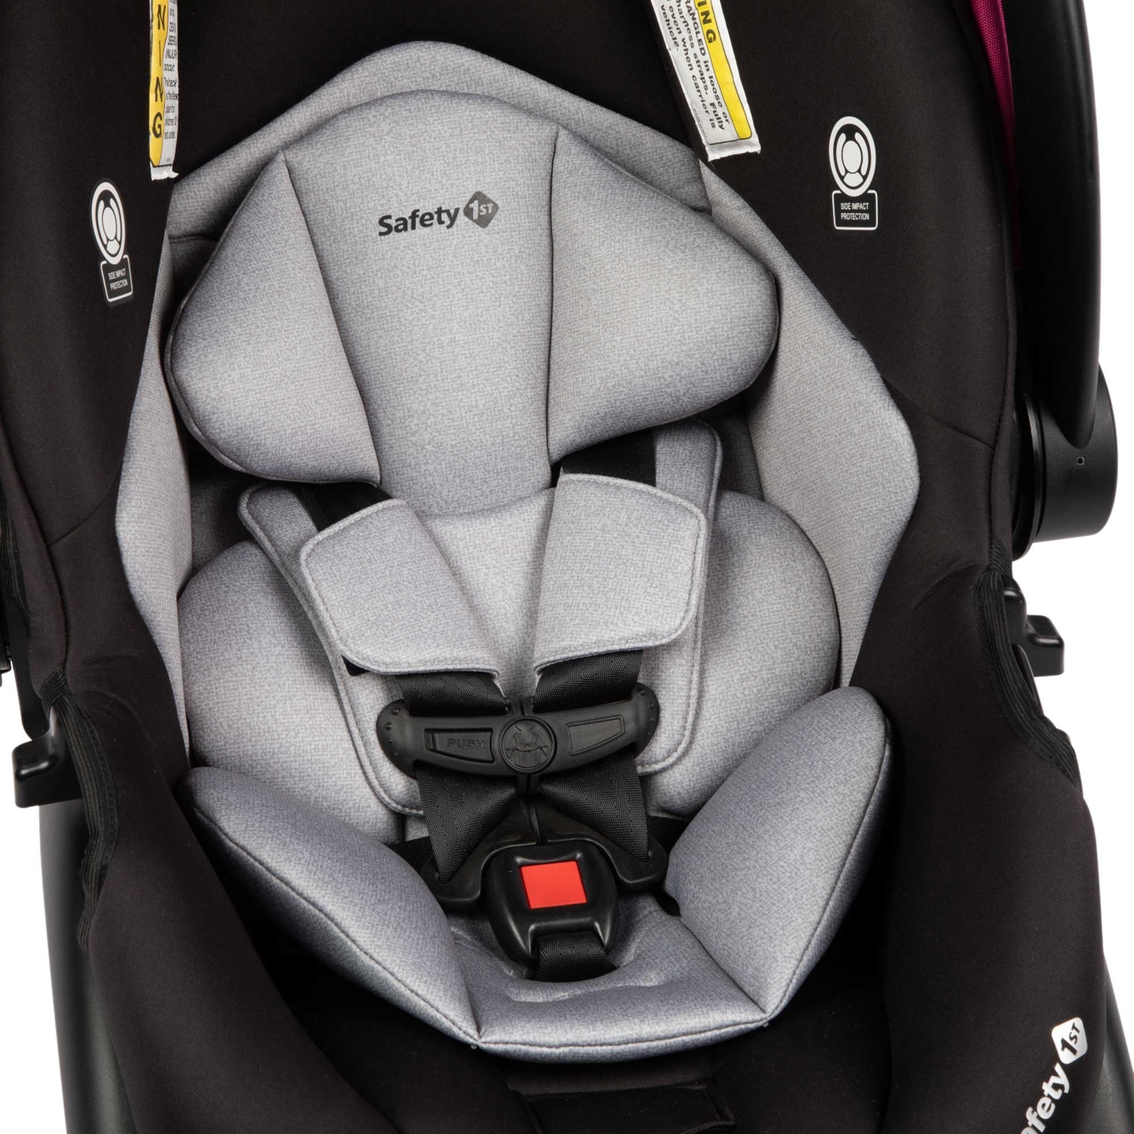 Safety 1st Grow and Go Flex 8 in 1 Travel System - Image 10 of 10